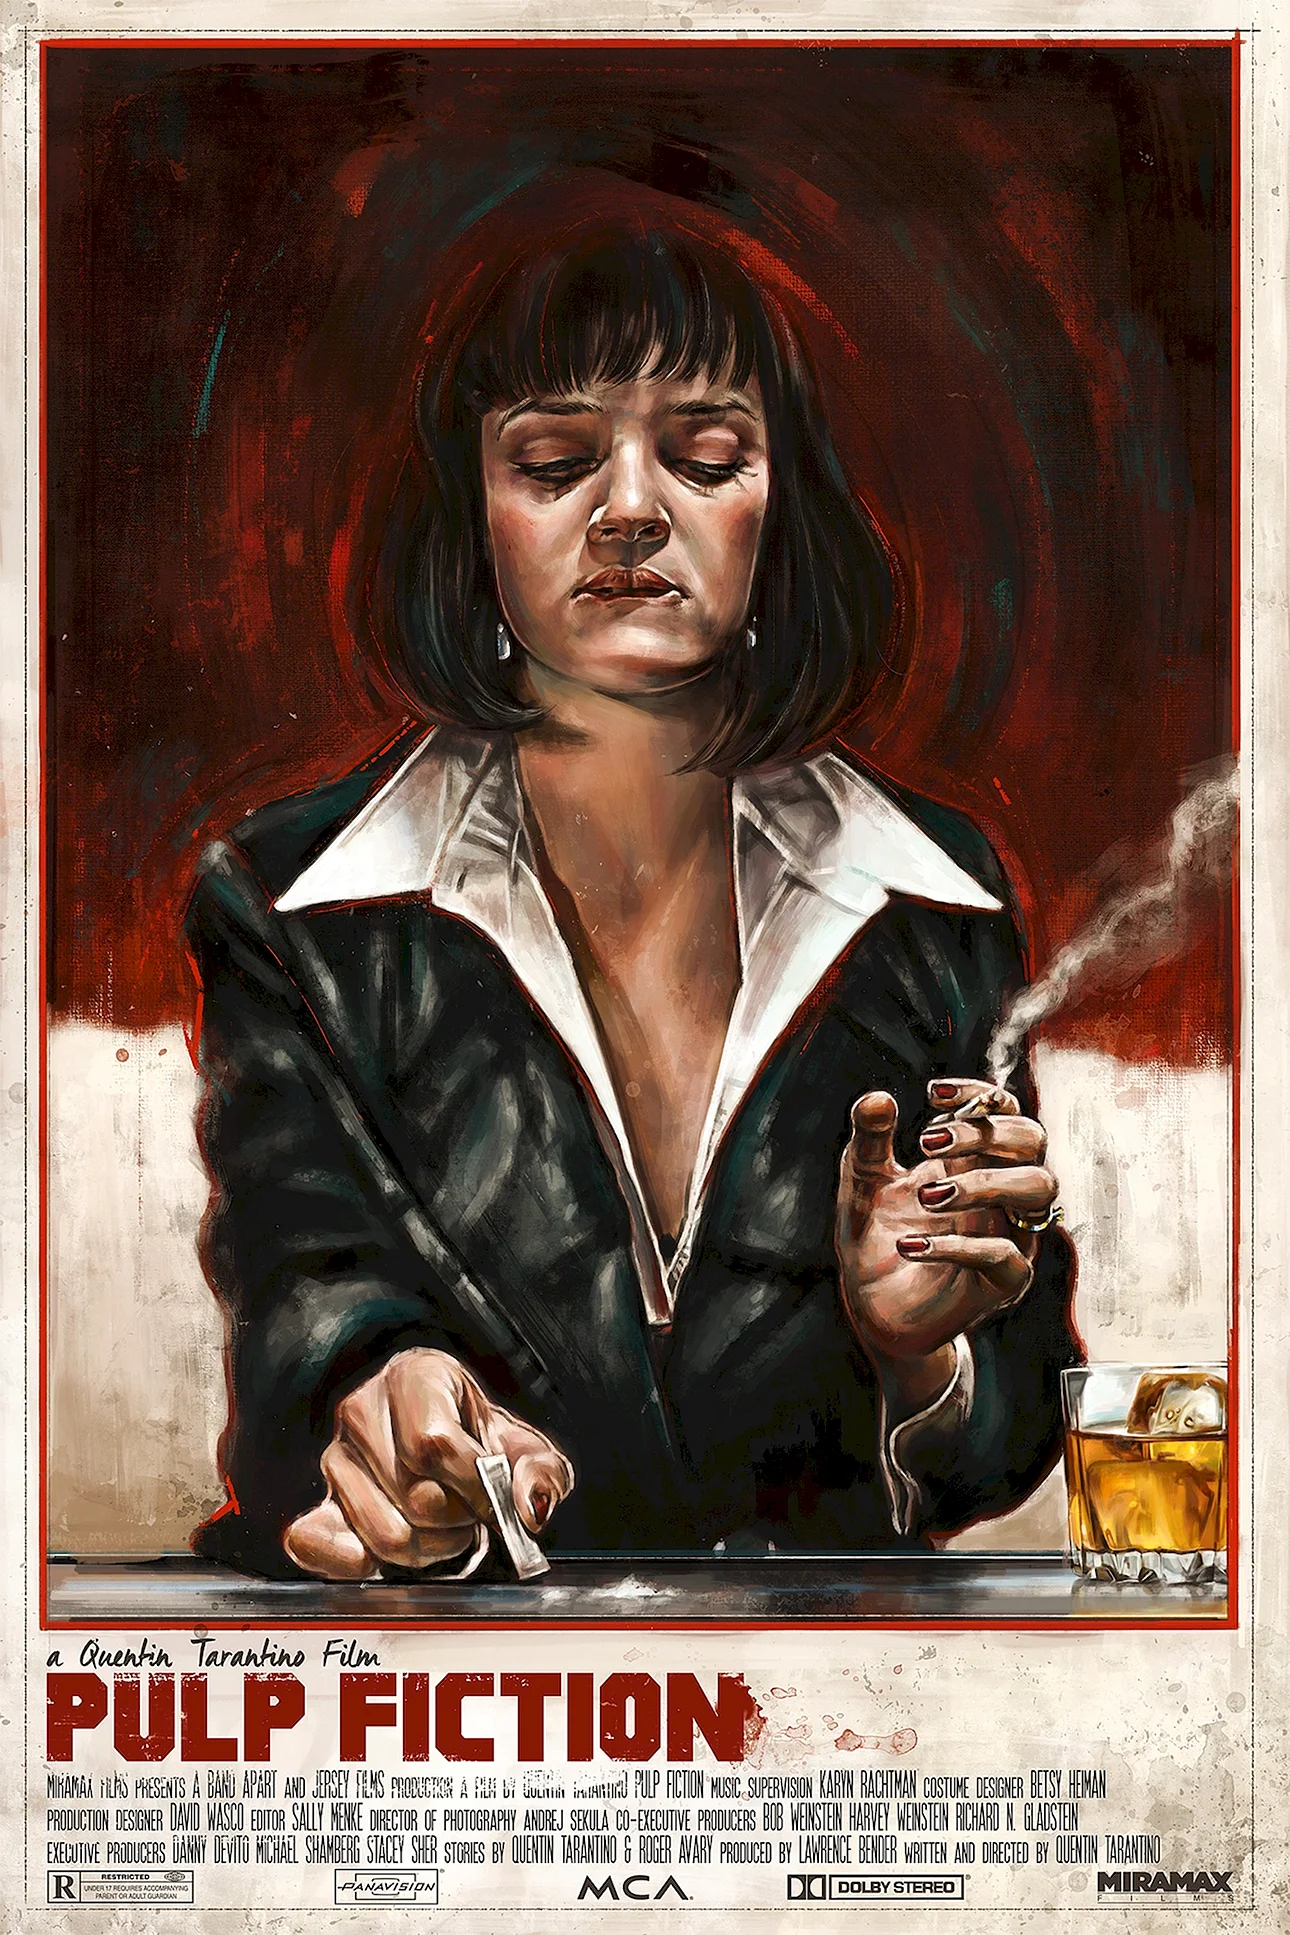 Pulp Fiction Poster Wallpaper For iPhone